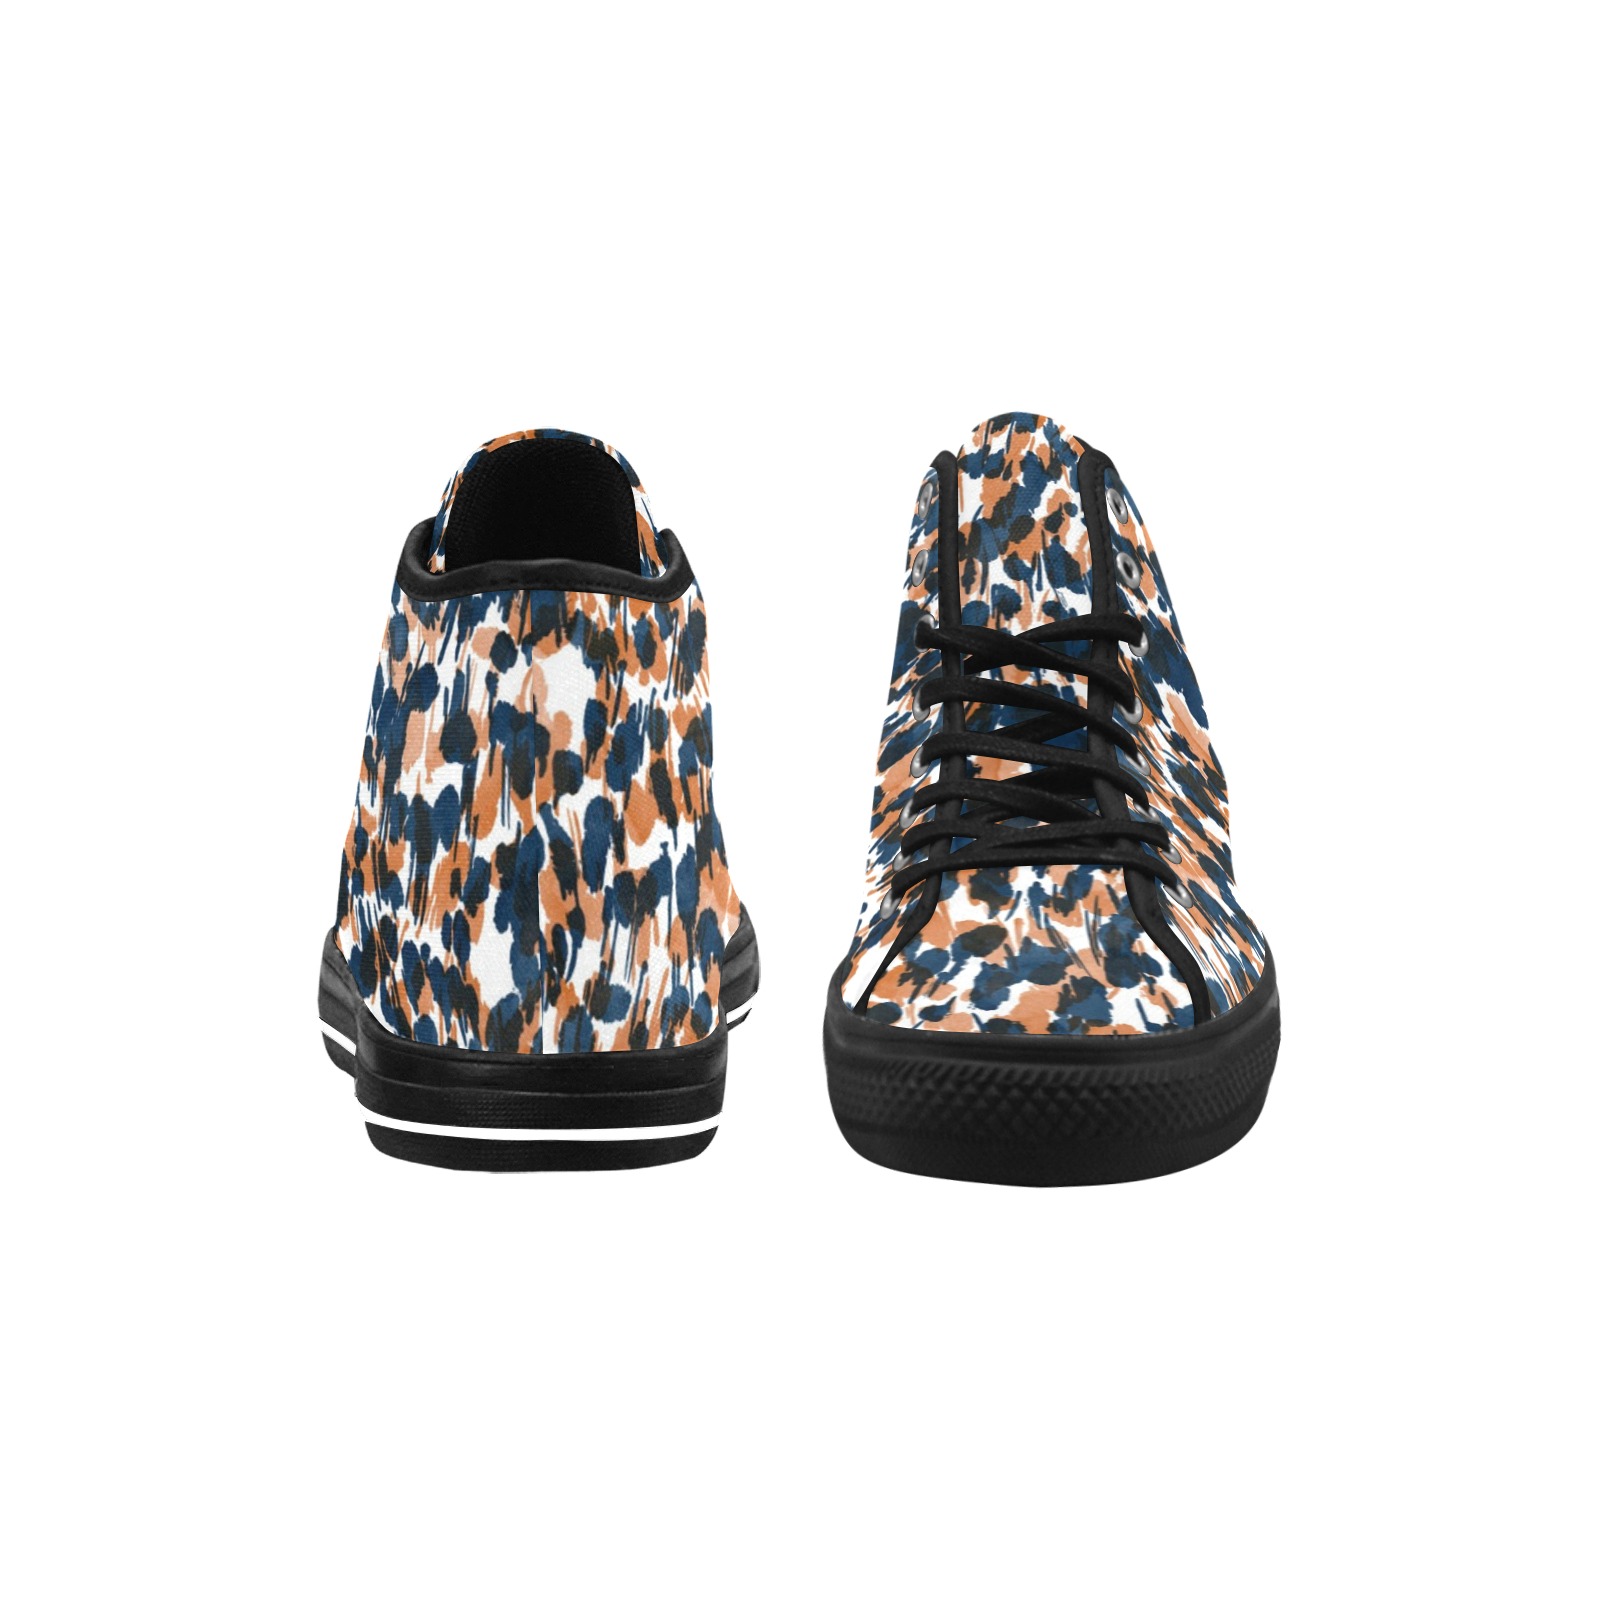 Dots brushstrokes animal print Vancouver H Women's Canvas Shoes (1013-1)